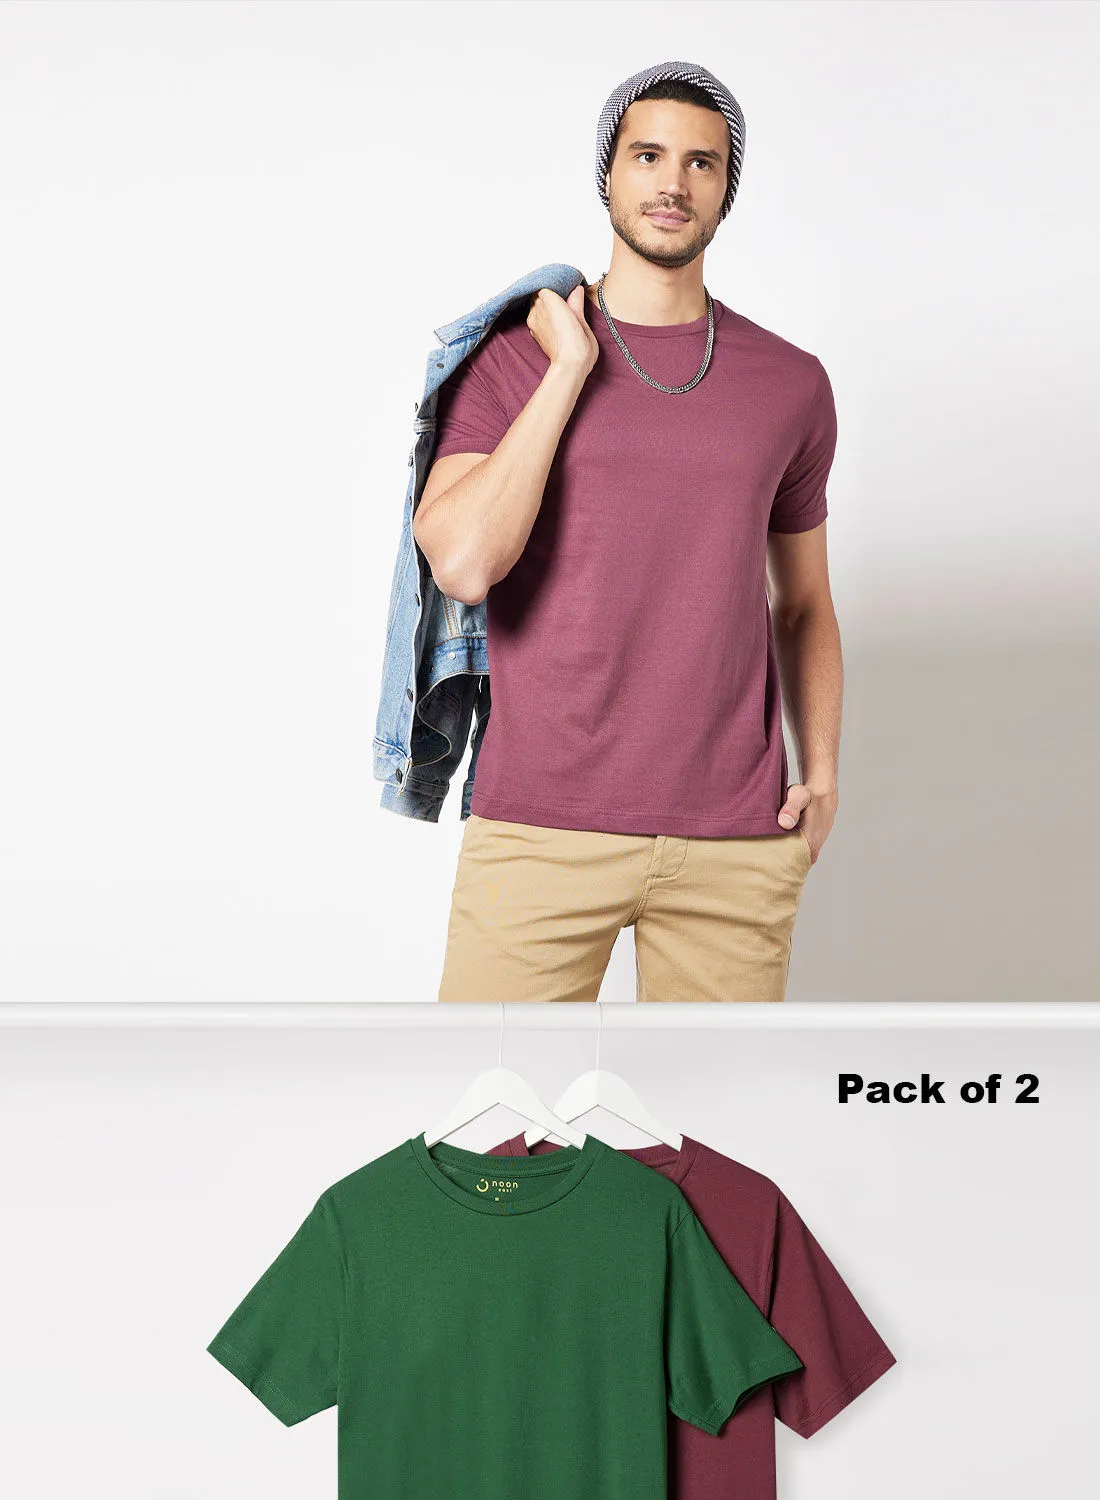 Noon East Pack Of 2 Men's Basic Cotton Biowashed Fabric Crew Neck Comfort Fit Stylish Design T-Shirt Dark Green/Red Maroon